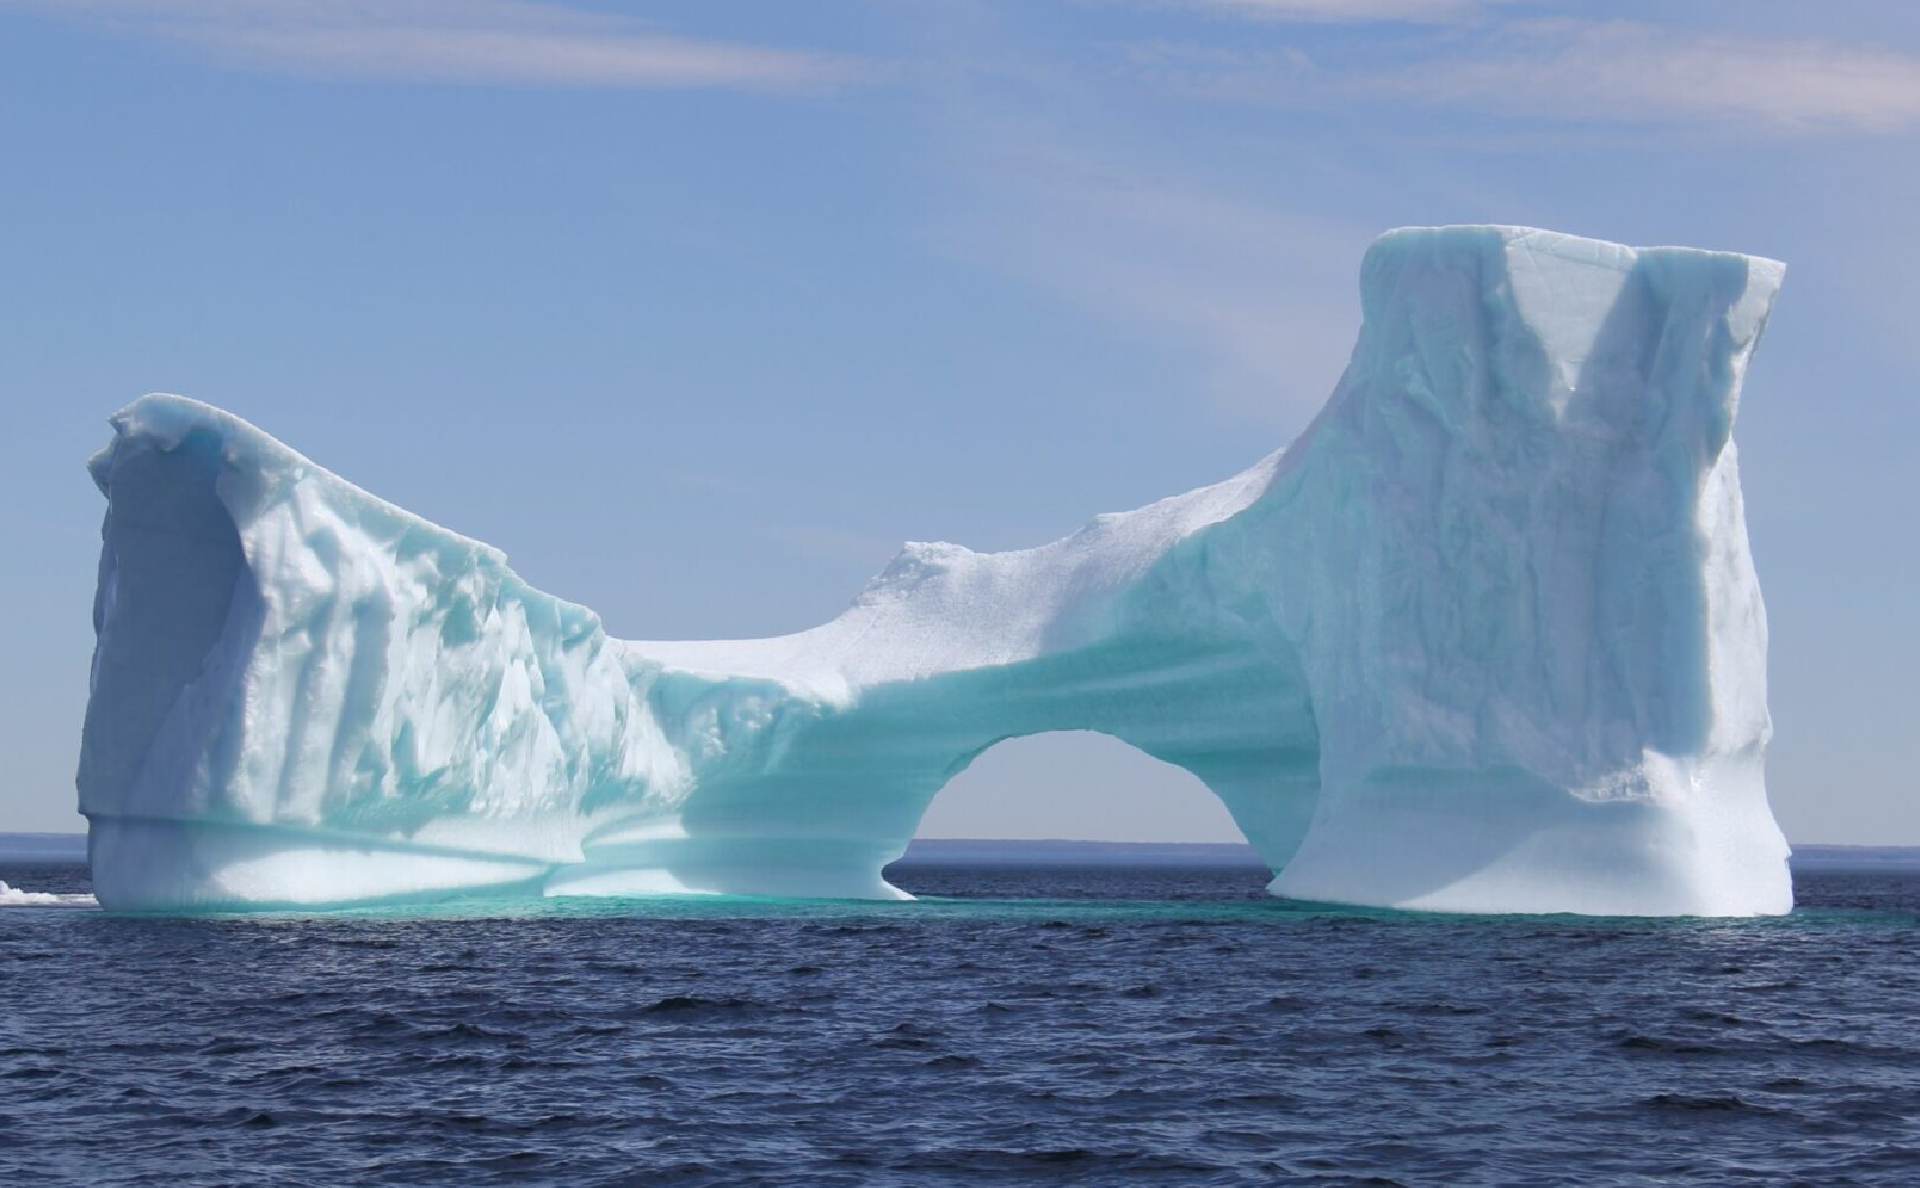 A beautiful iceberg in the middle of an ocean